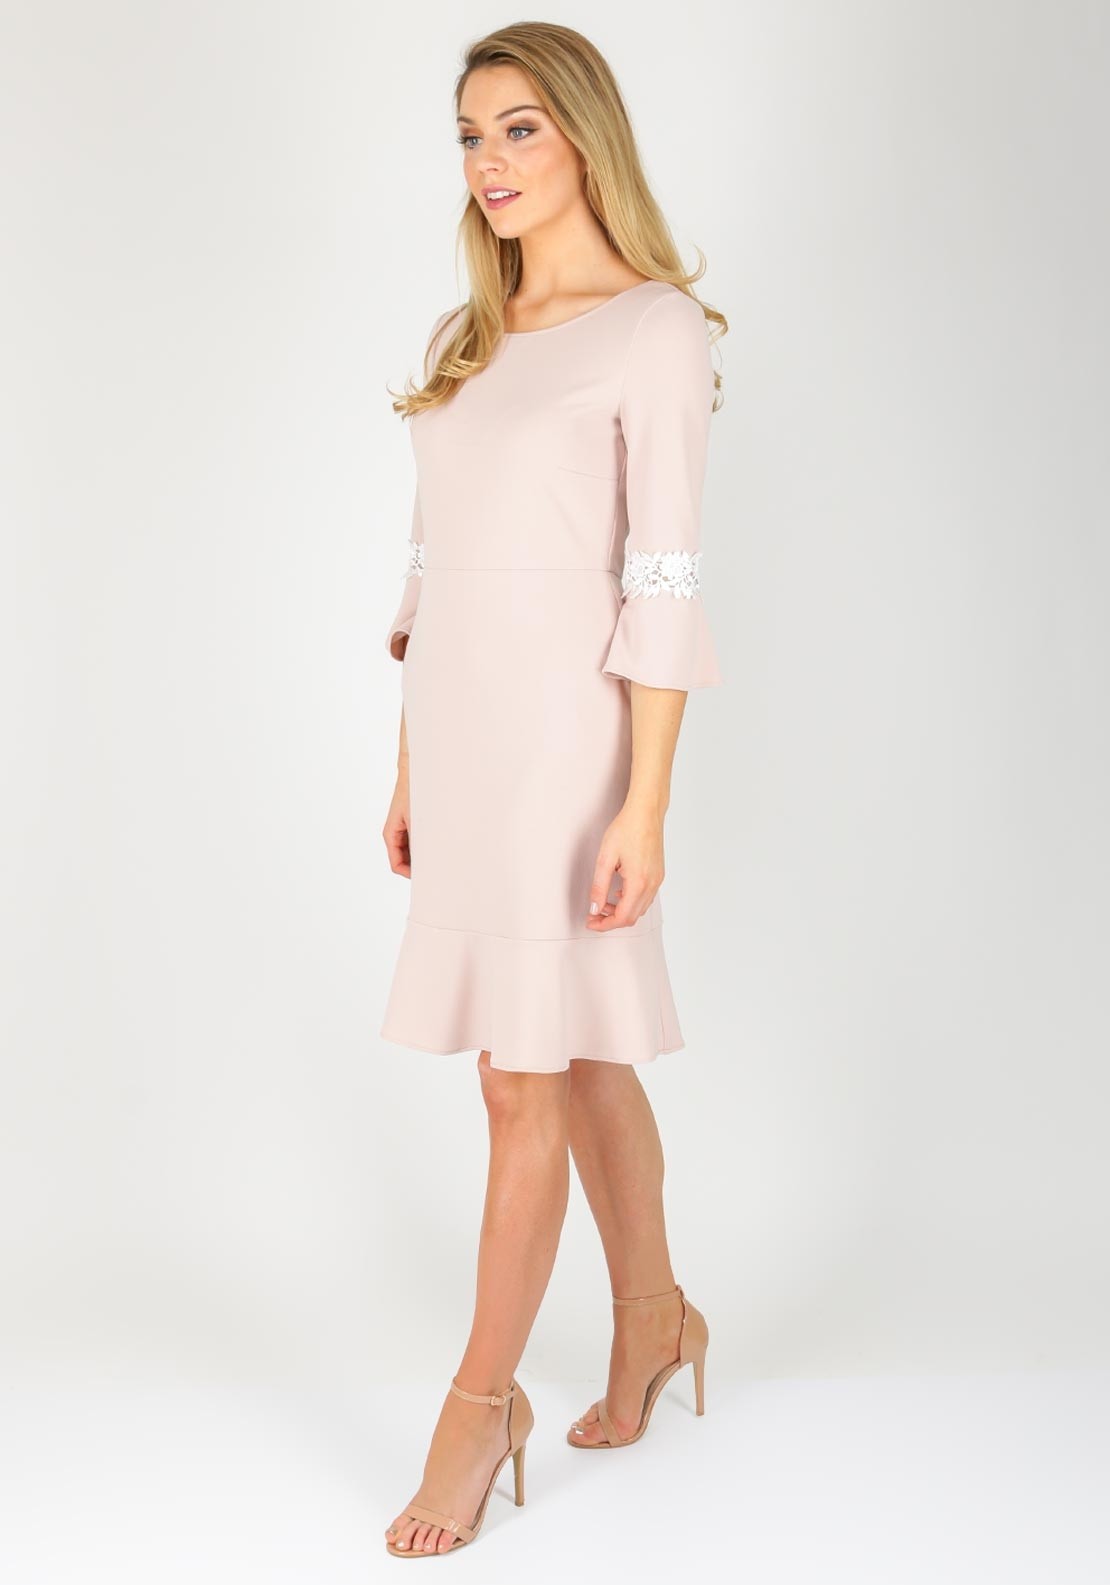 VERA MONT DRESSES – EXCLUSIVE FASHION FROM VERA MONT FOR THE LADY